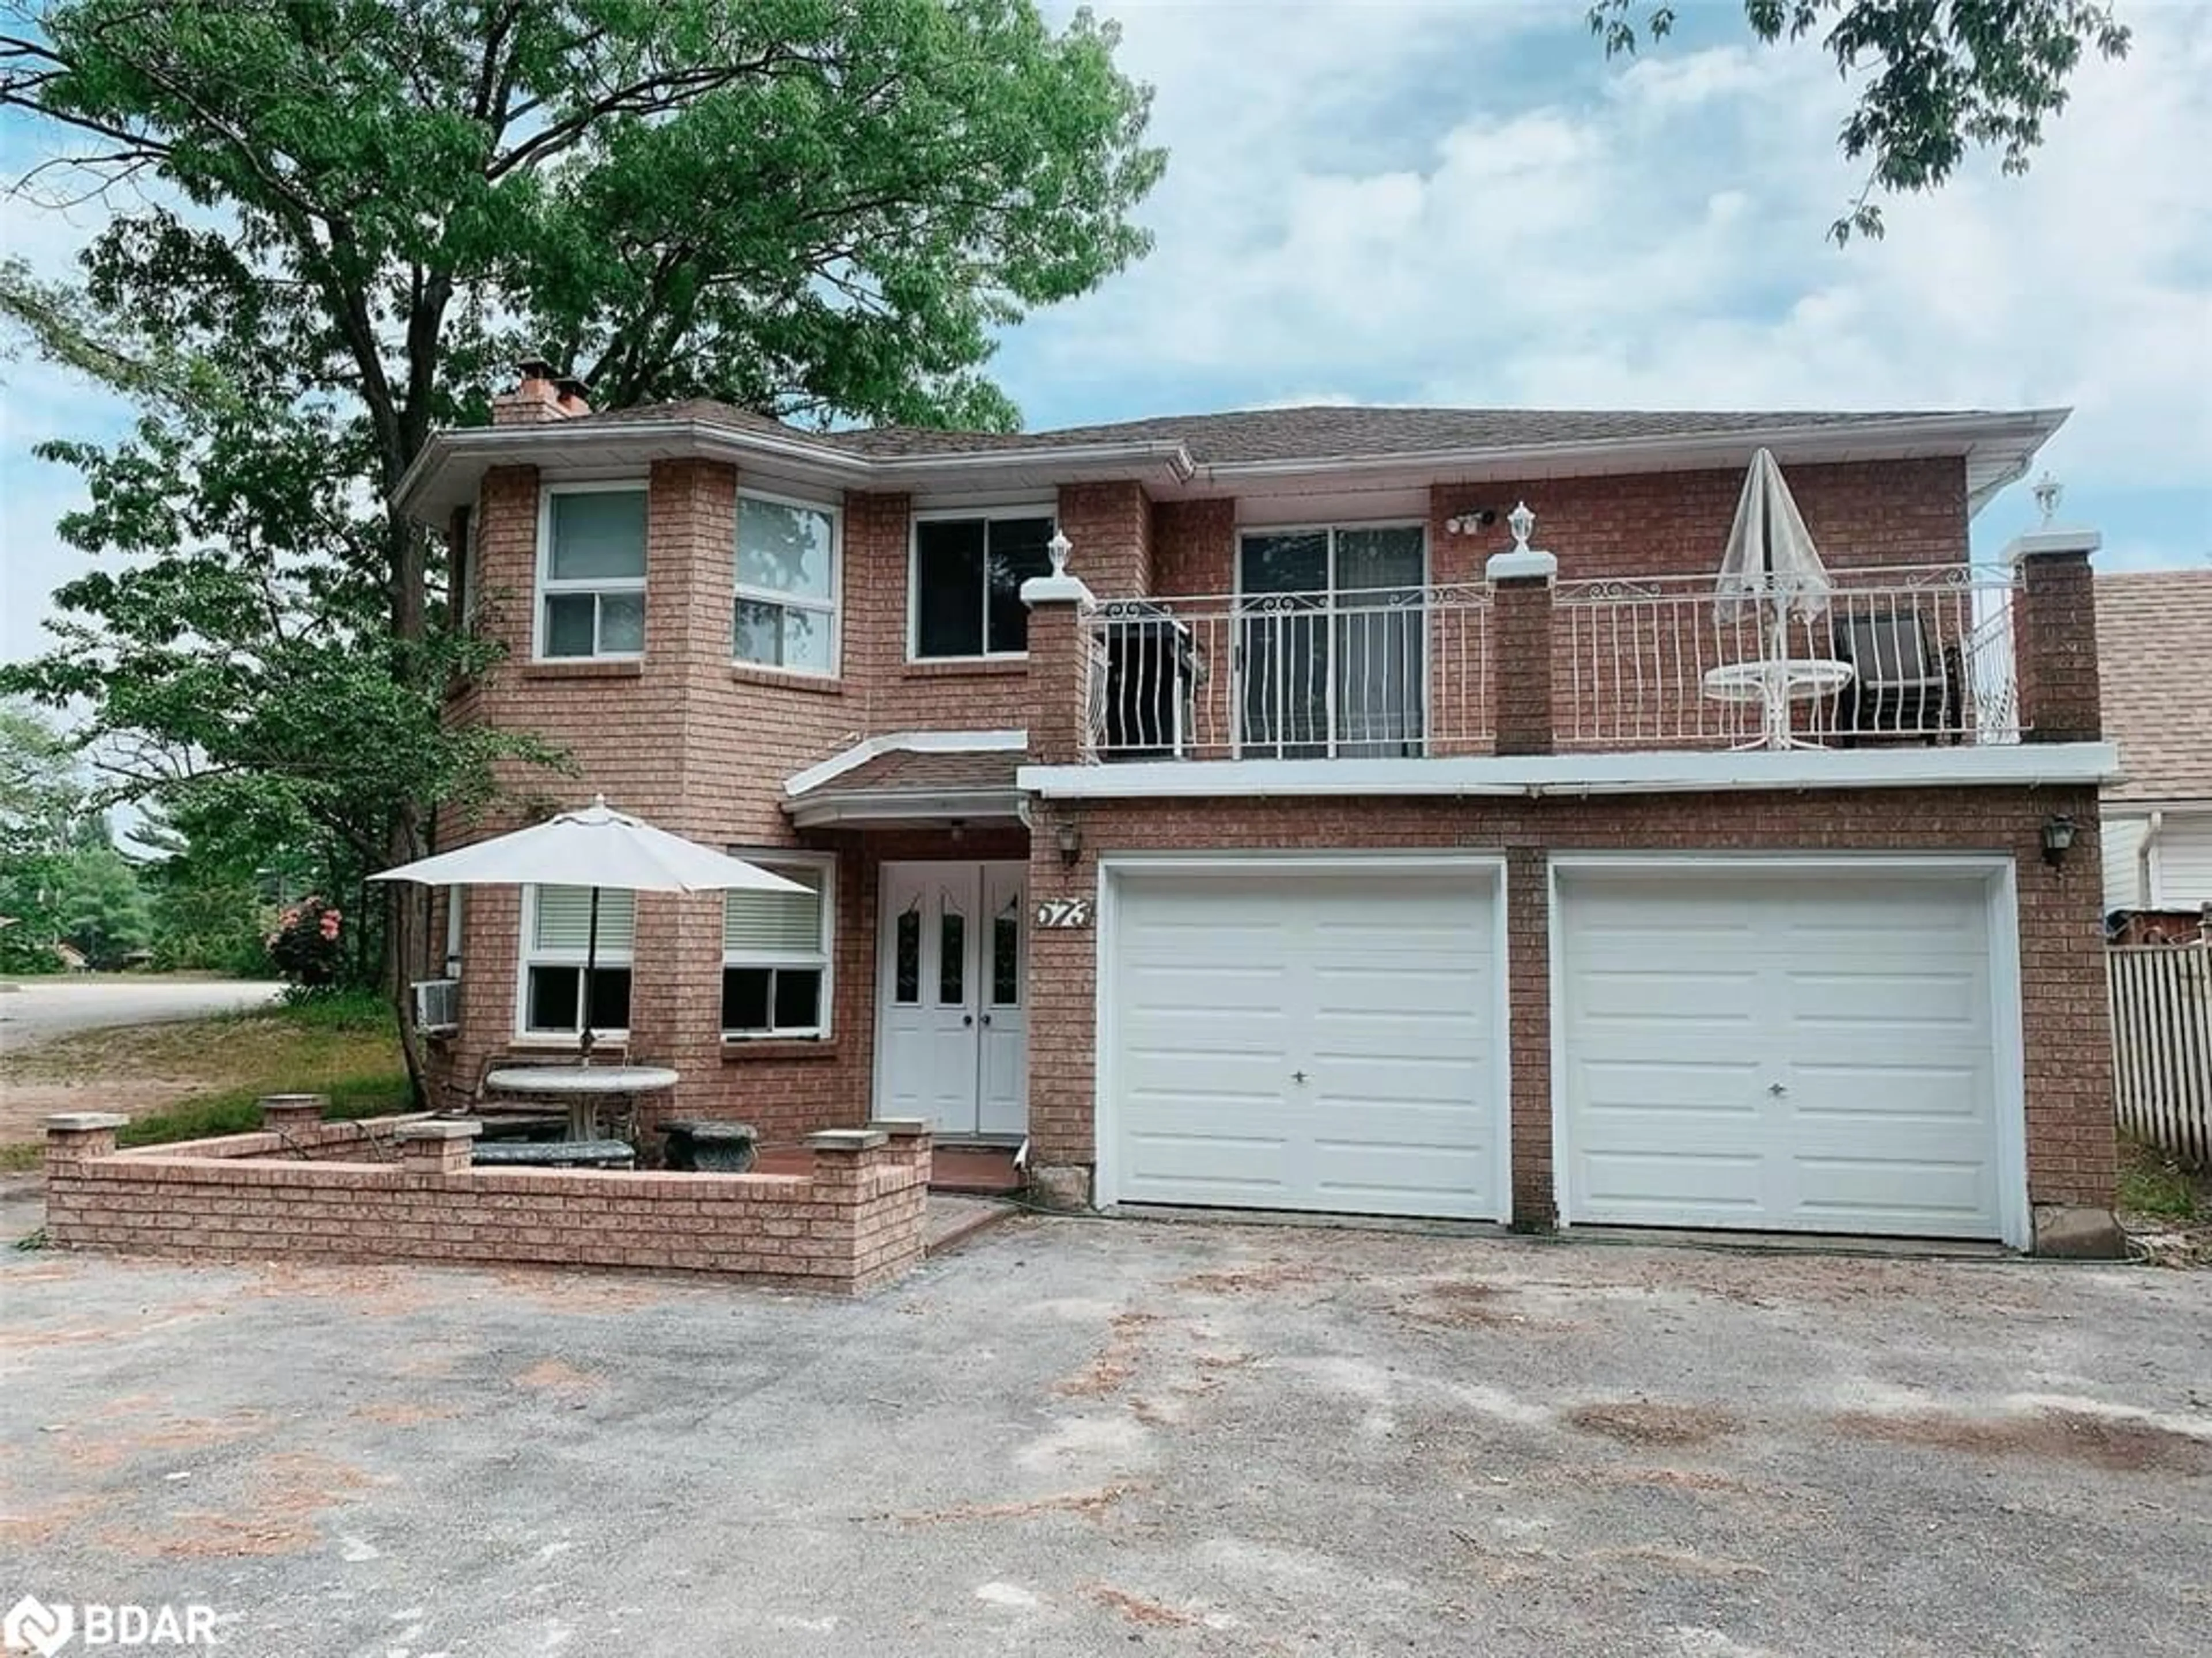 Home with brick exterior material for 573 Mosley St, Wasaga Beach Ontario L9Z 2J4